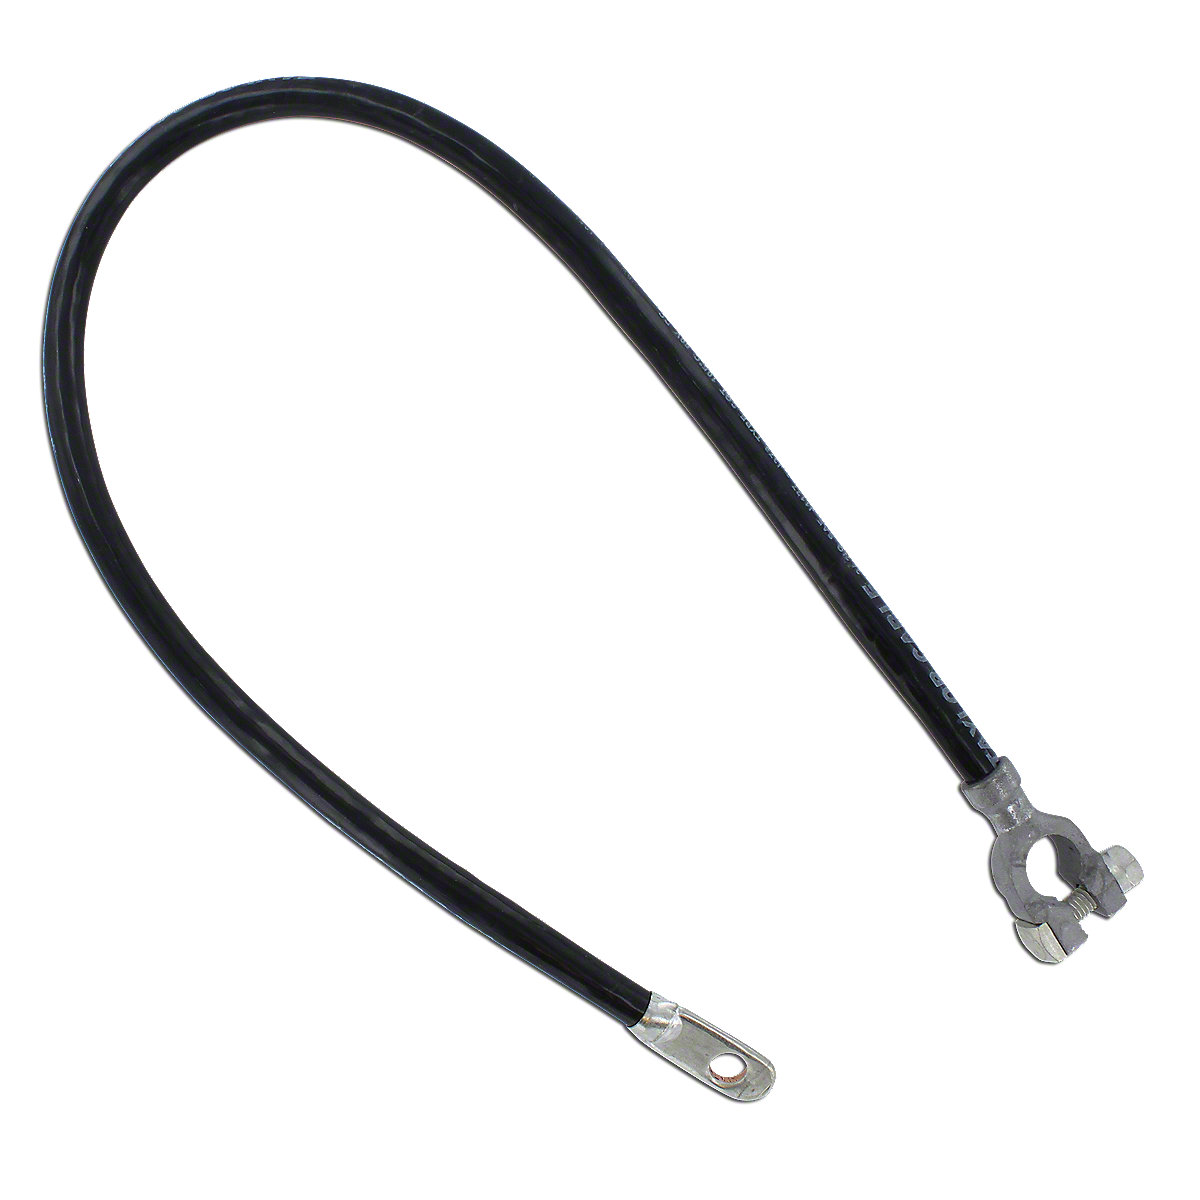 27 Battery Cable For Massey Harris And Massey Ferguson Tractors.